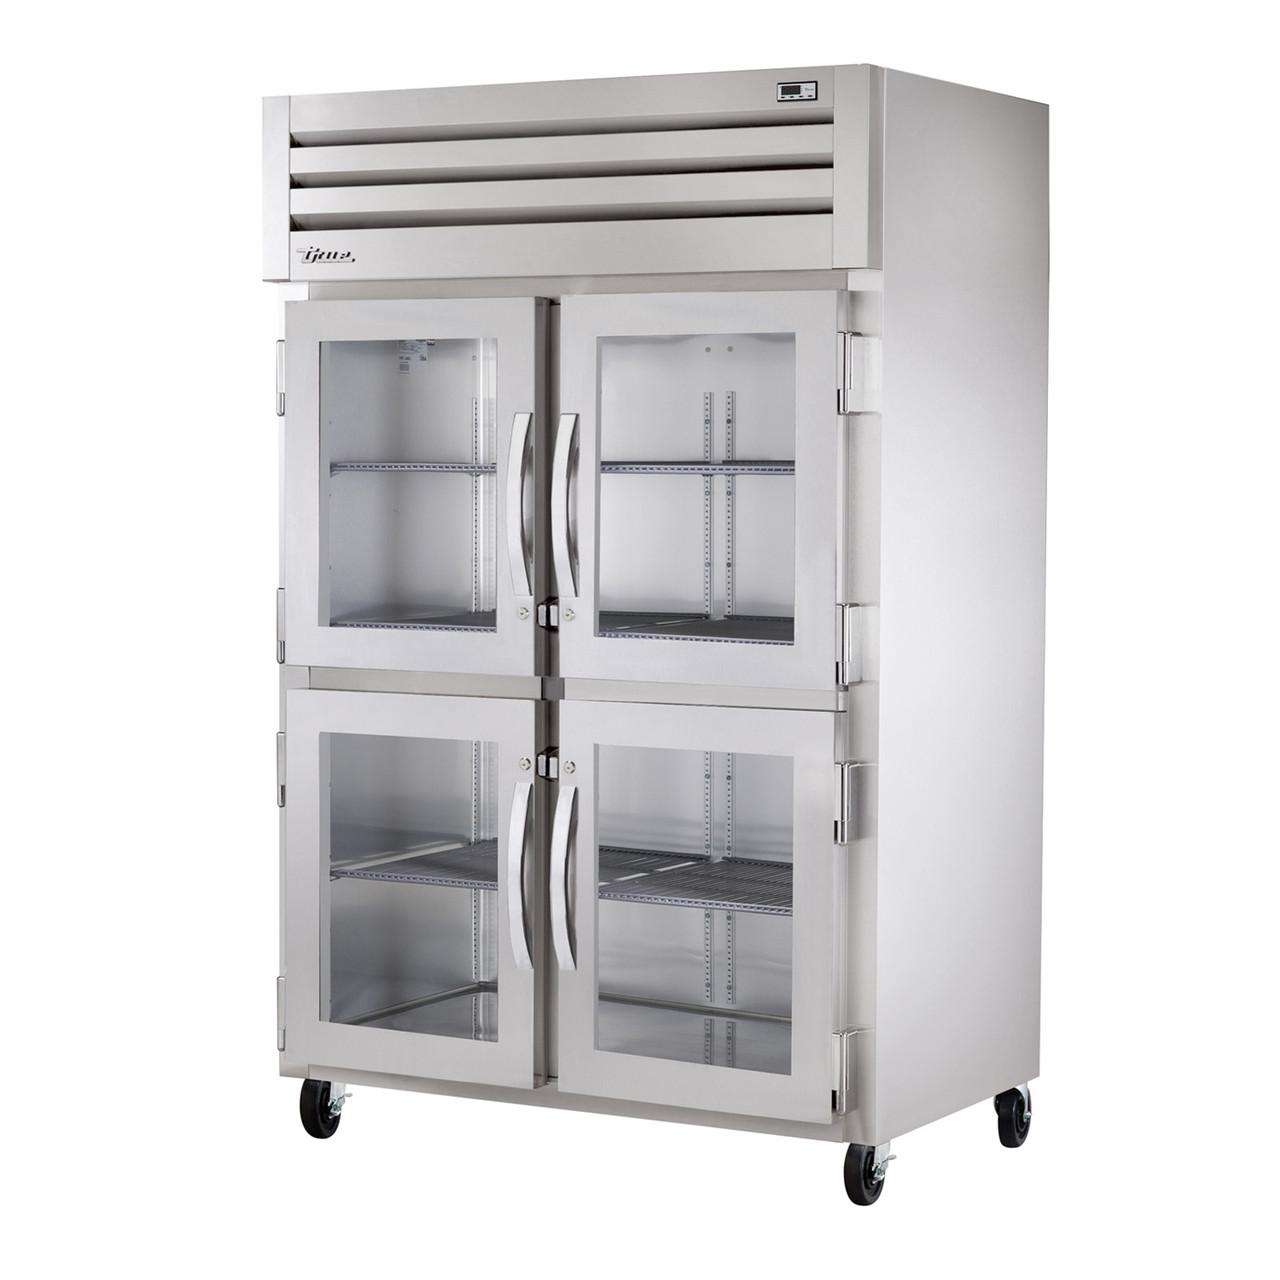 True Manufacturing STR2H-4HG Spec Series 2 Section Heated Reach In Cabinet with Half Height Glass Doors - All Stainless